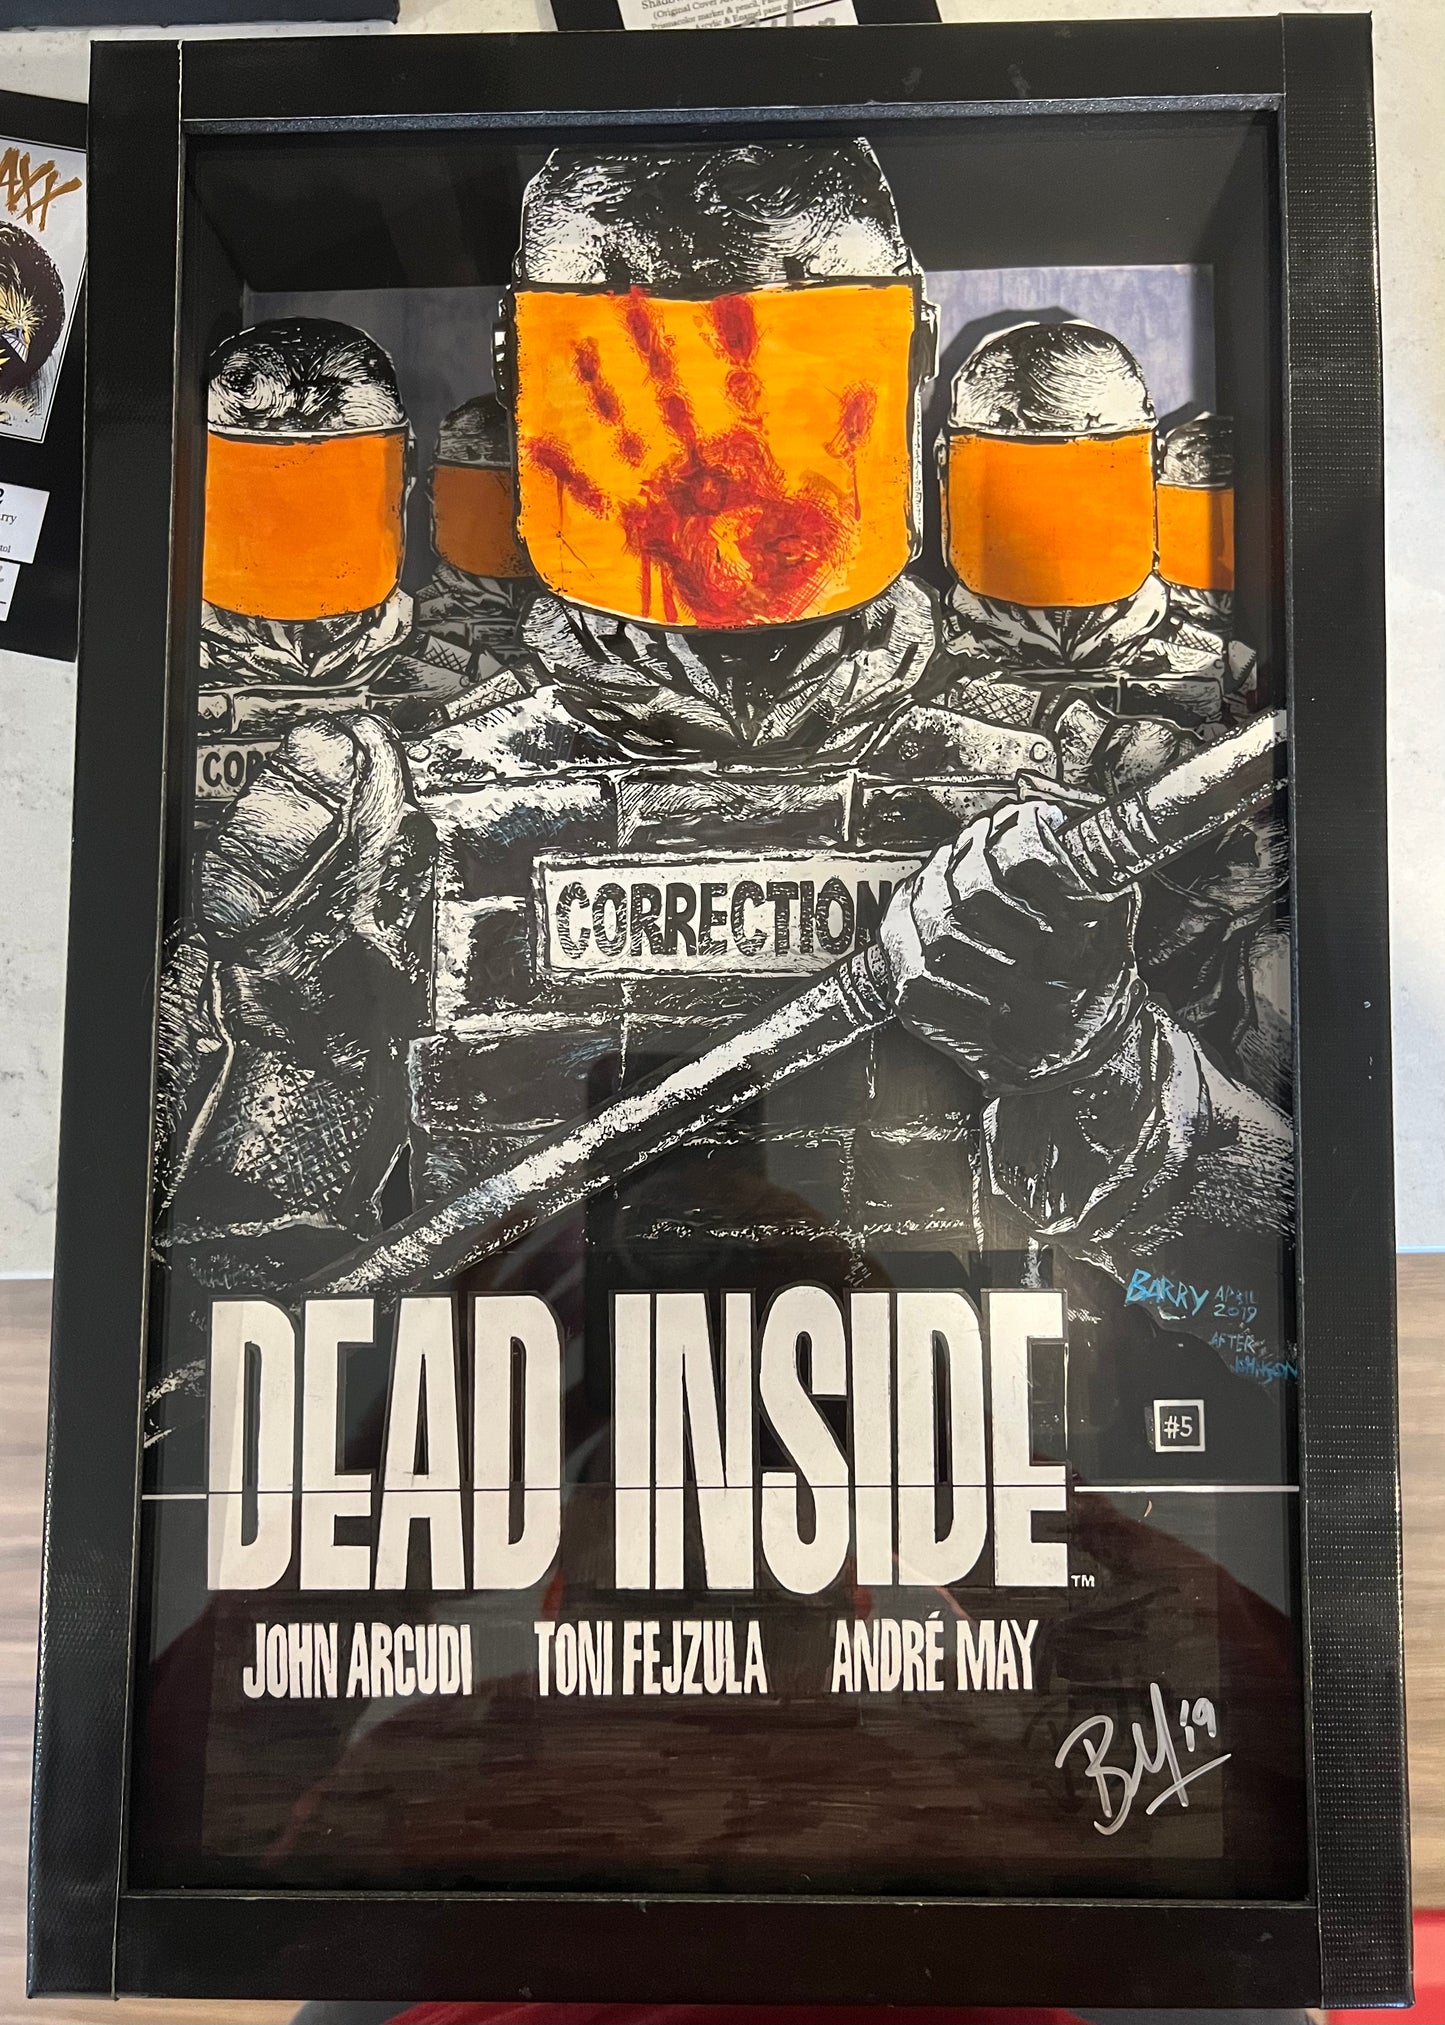 Dead Inside Shadowbox by Barry (A One of a Kind Shadowbox Art)